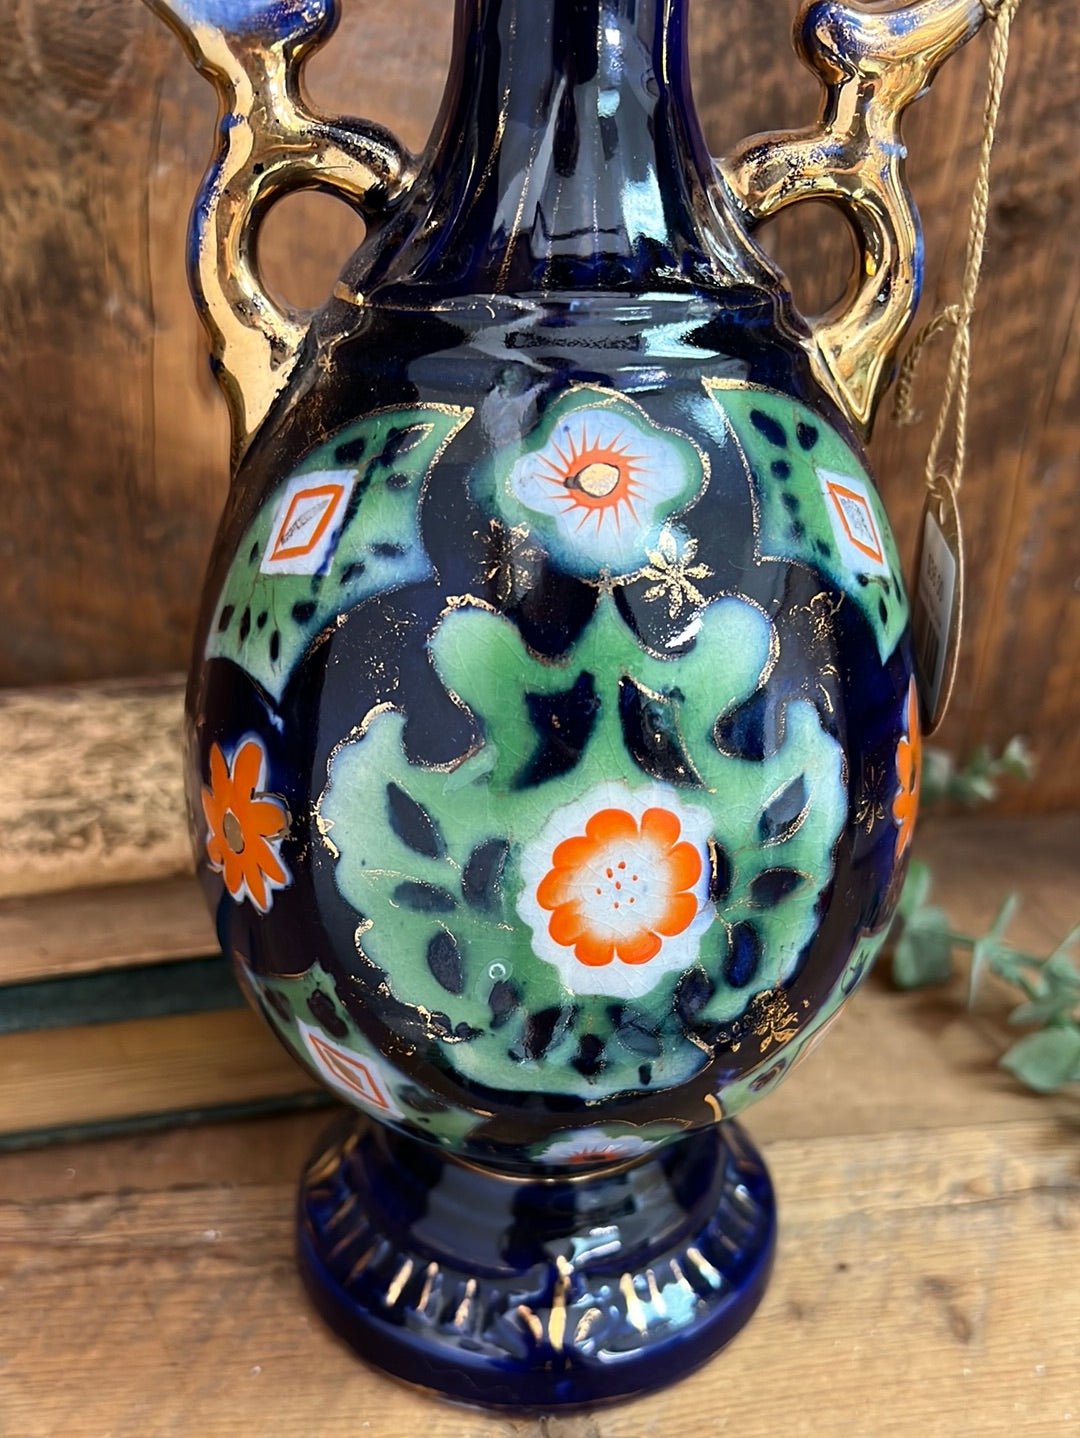 Antique Painted Glazed Blue and Gold Lidded Urn